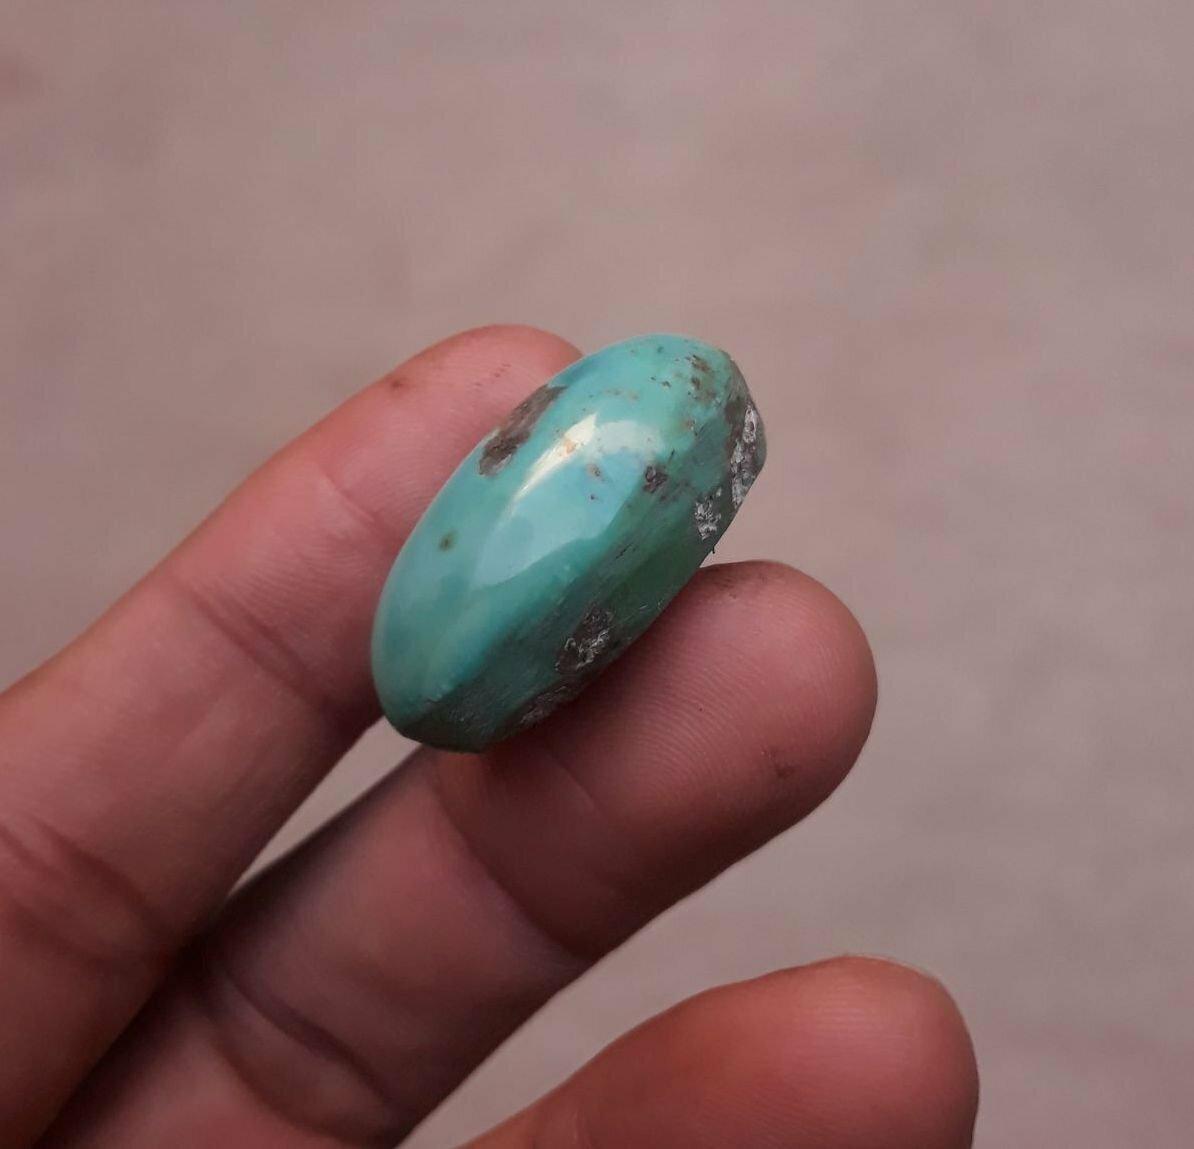 47ct Morenci Turquoise - Natural Turquoise - Green Matrix Turquoise - 29x18mm